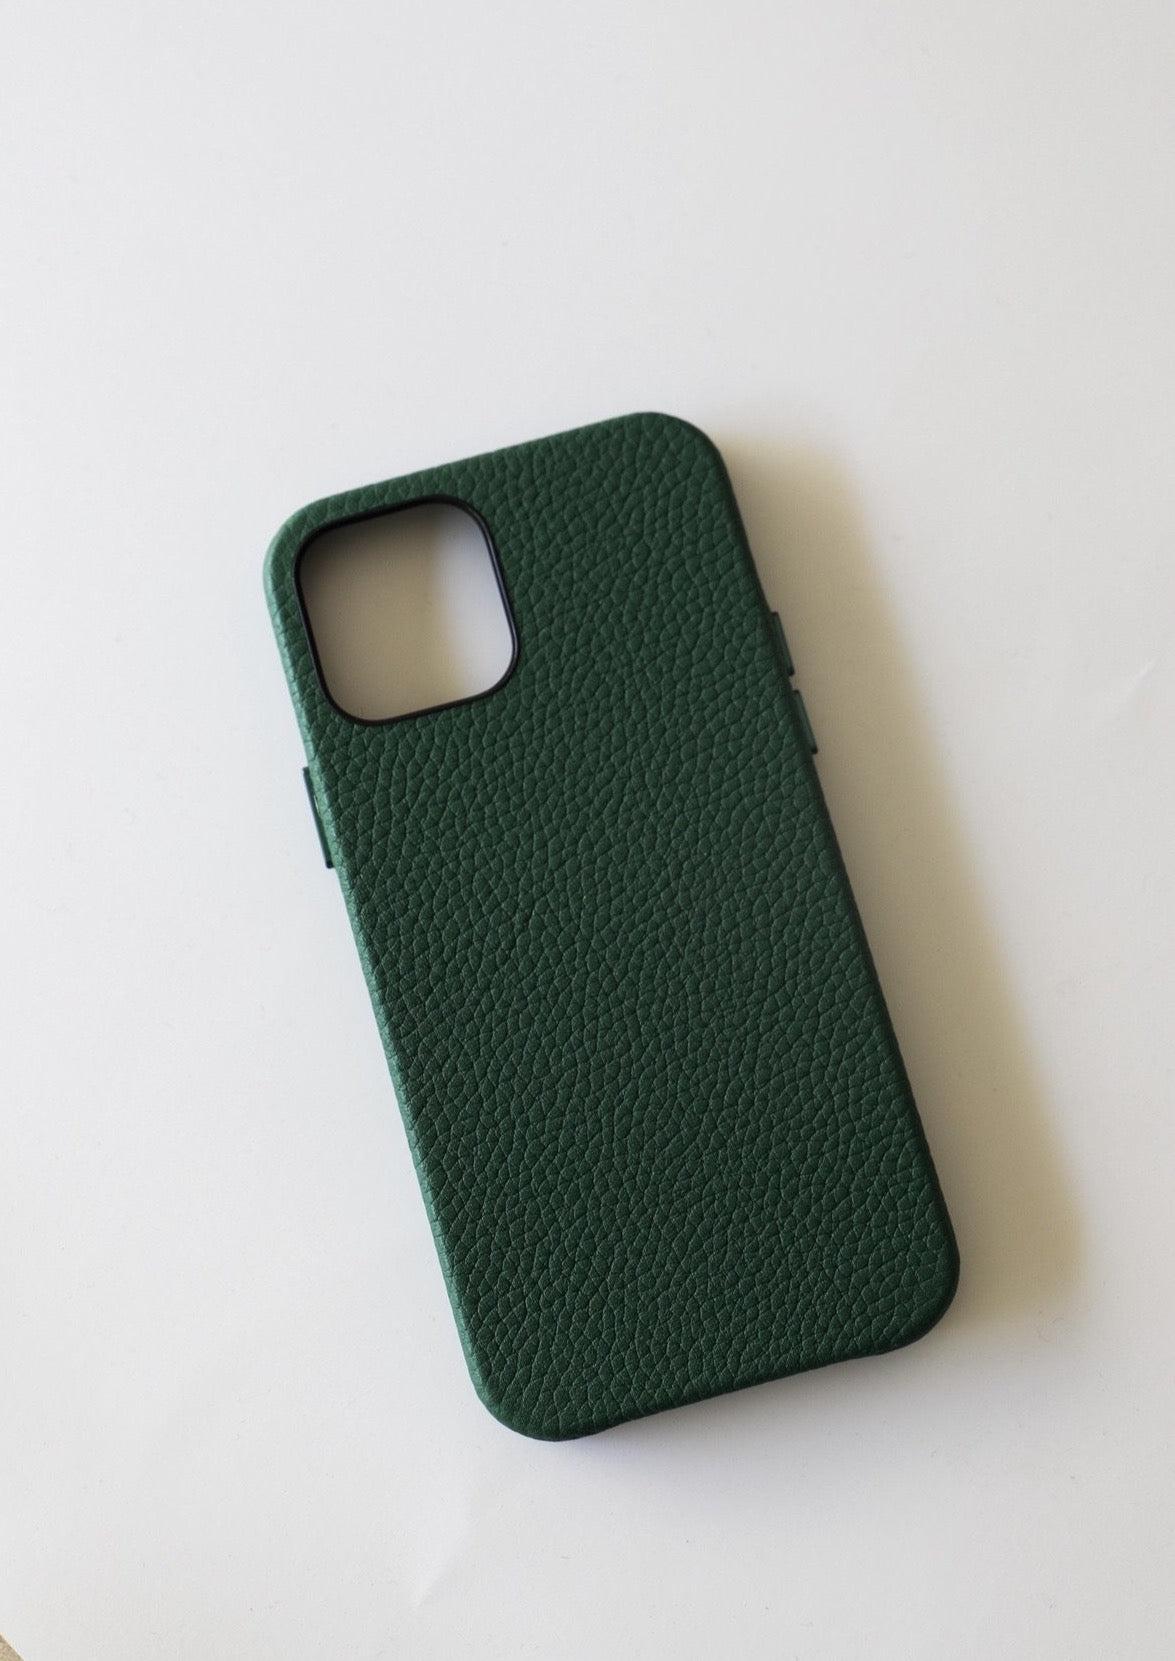 Leather iPhone Cover